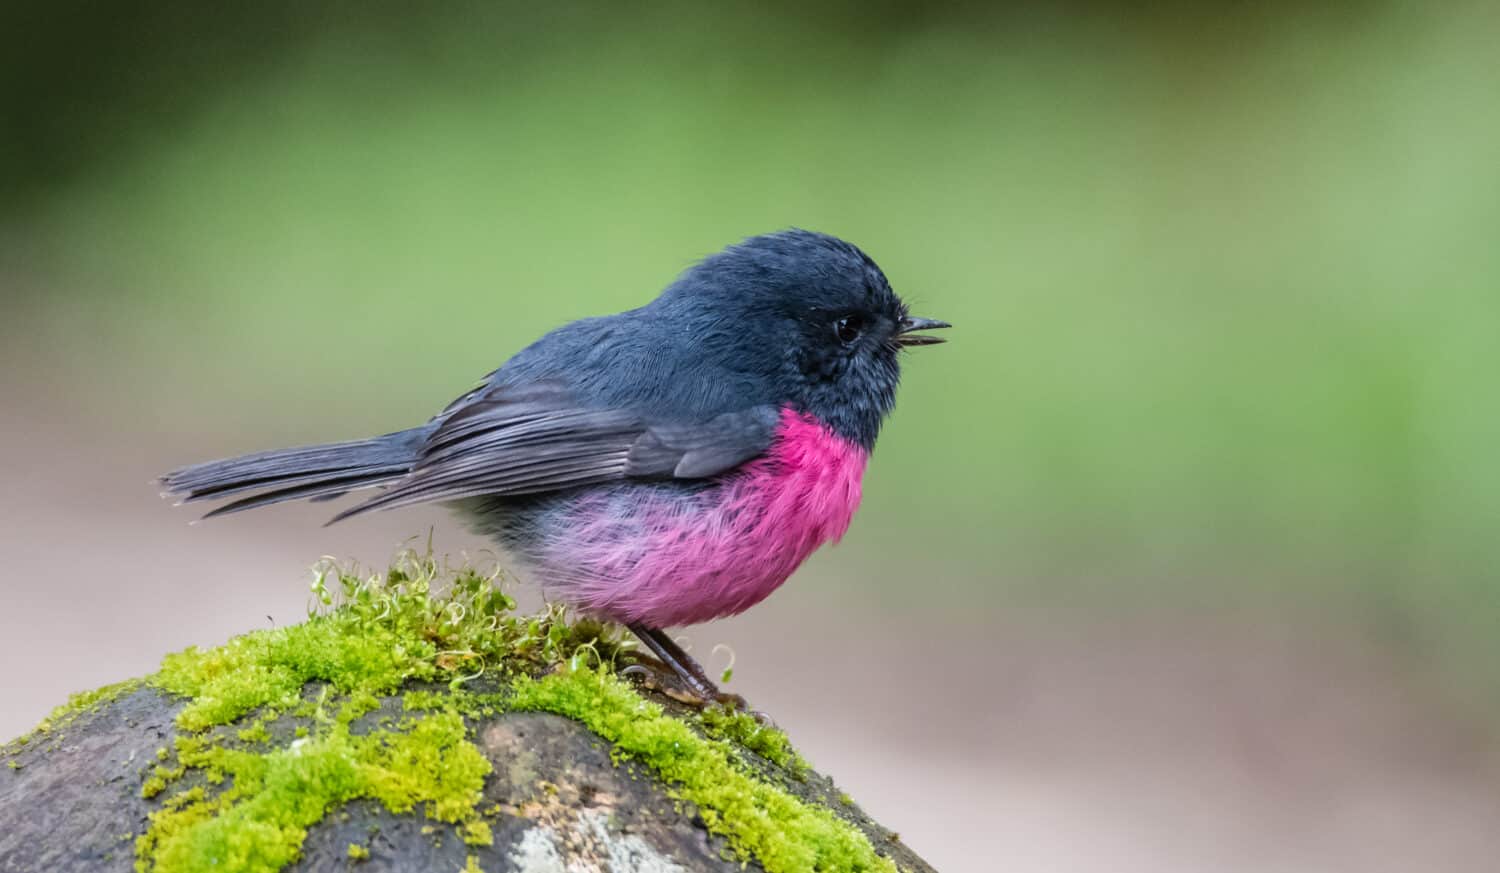 Pink Robin photographed in Victoria Australia